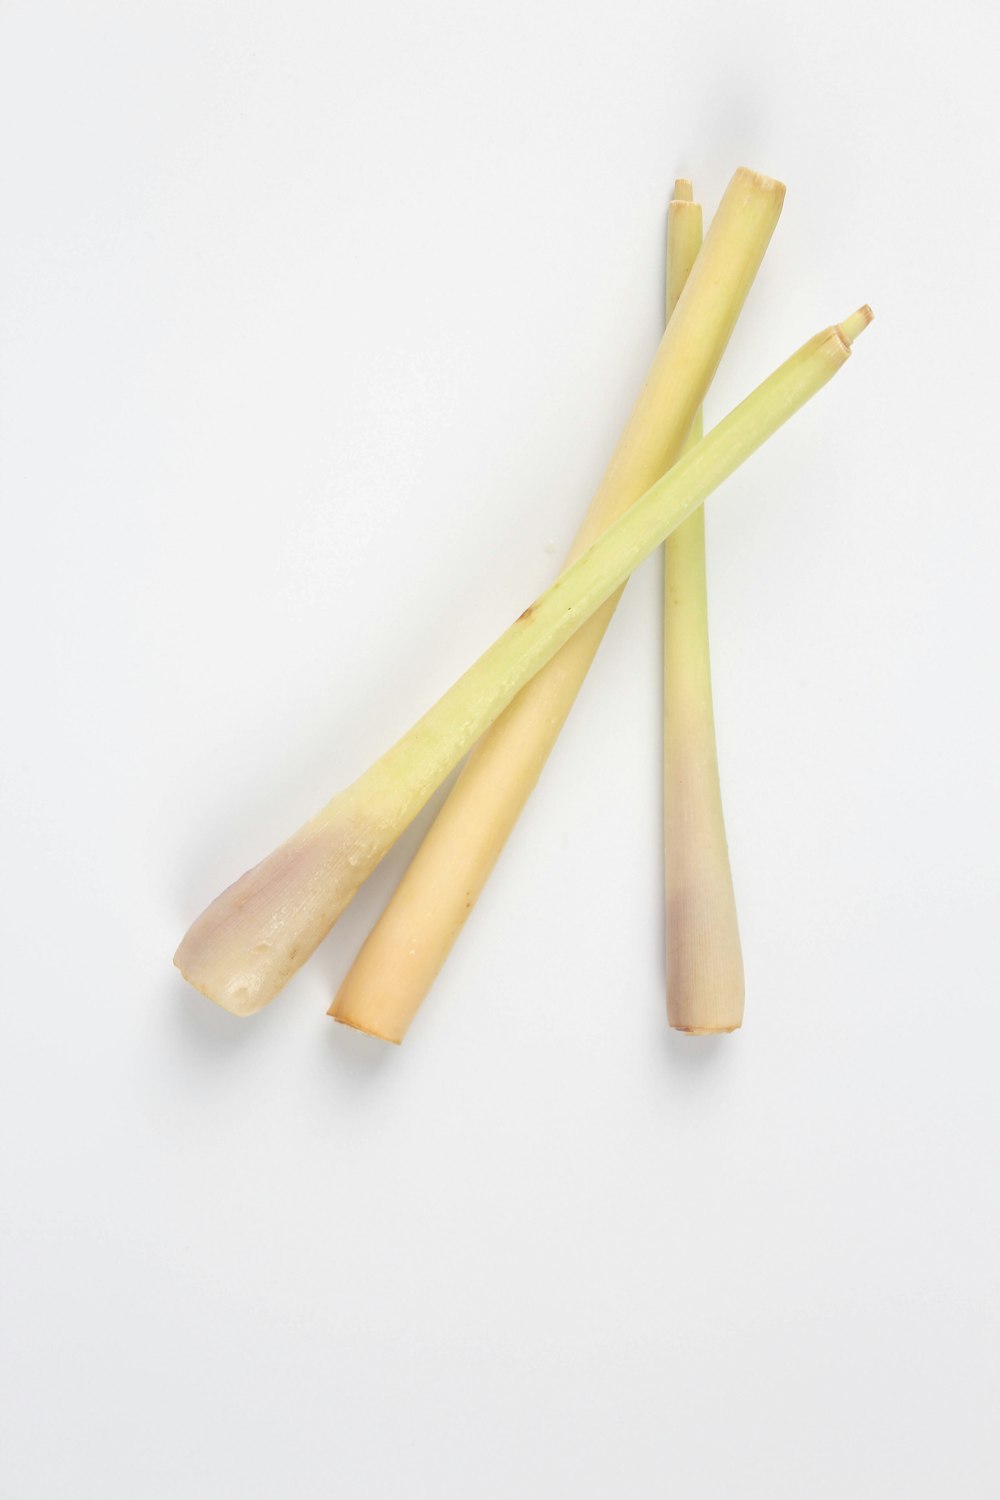 yellow and brown wooden sticks